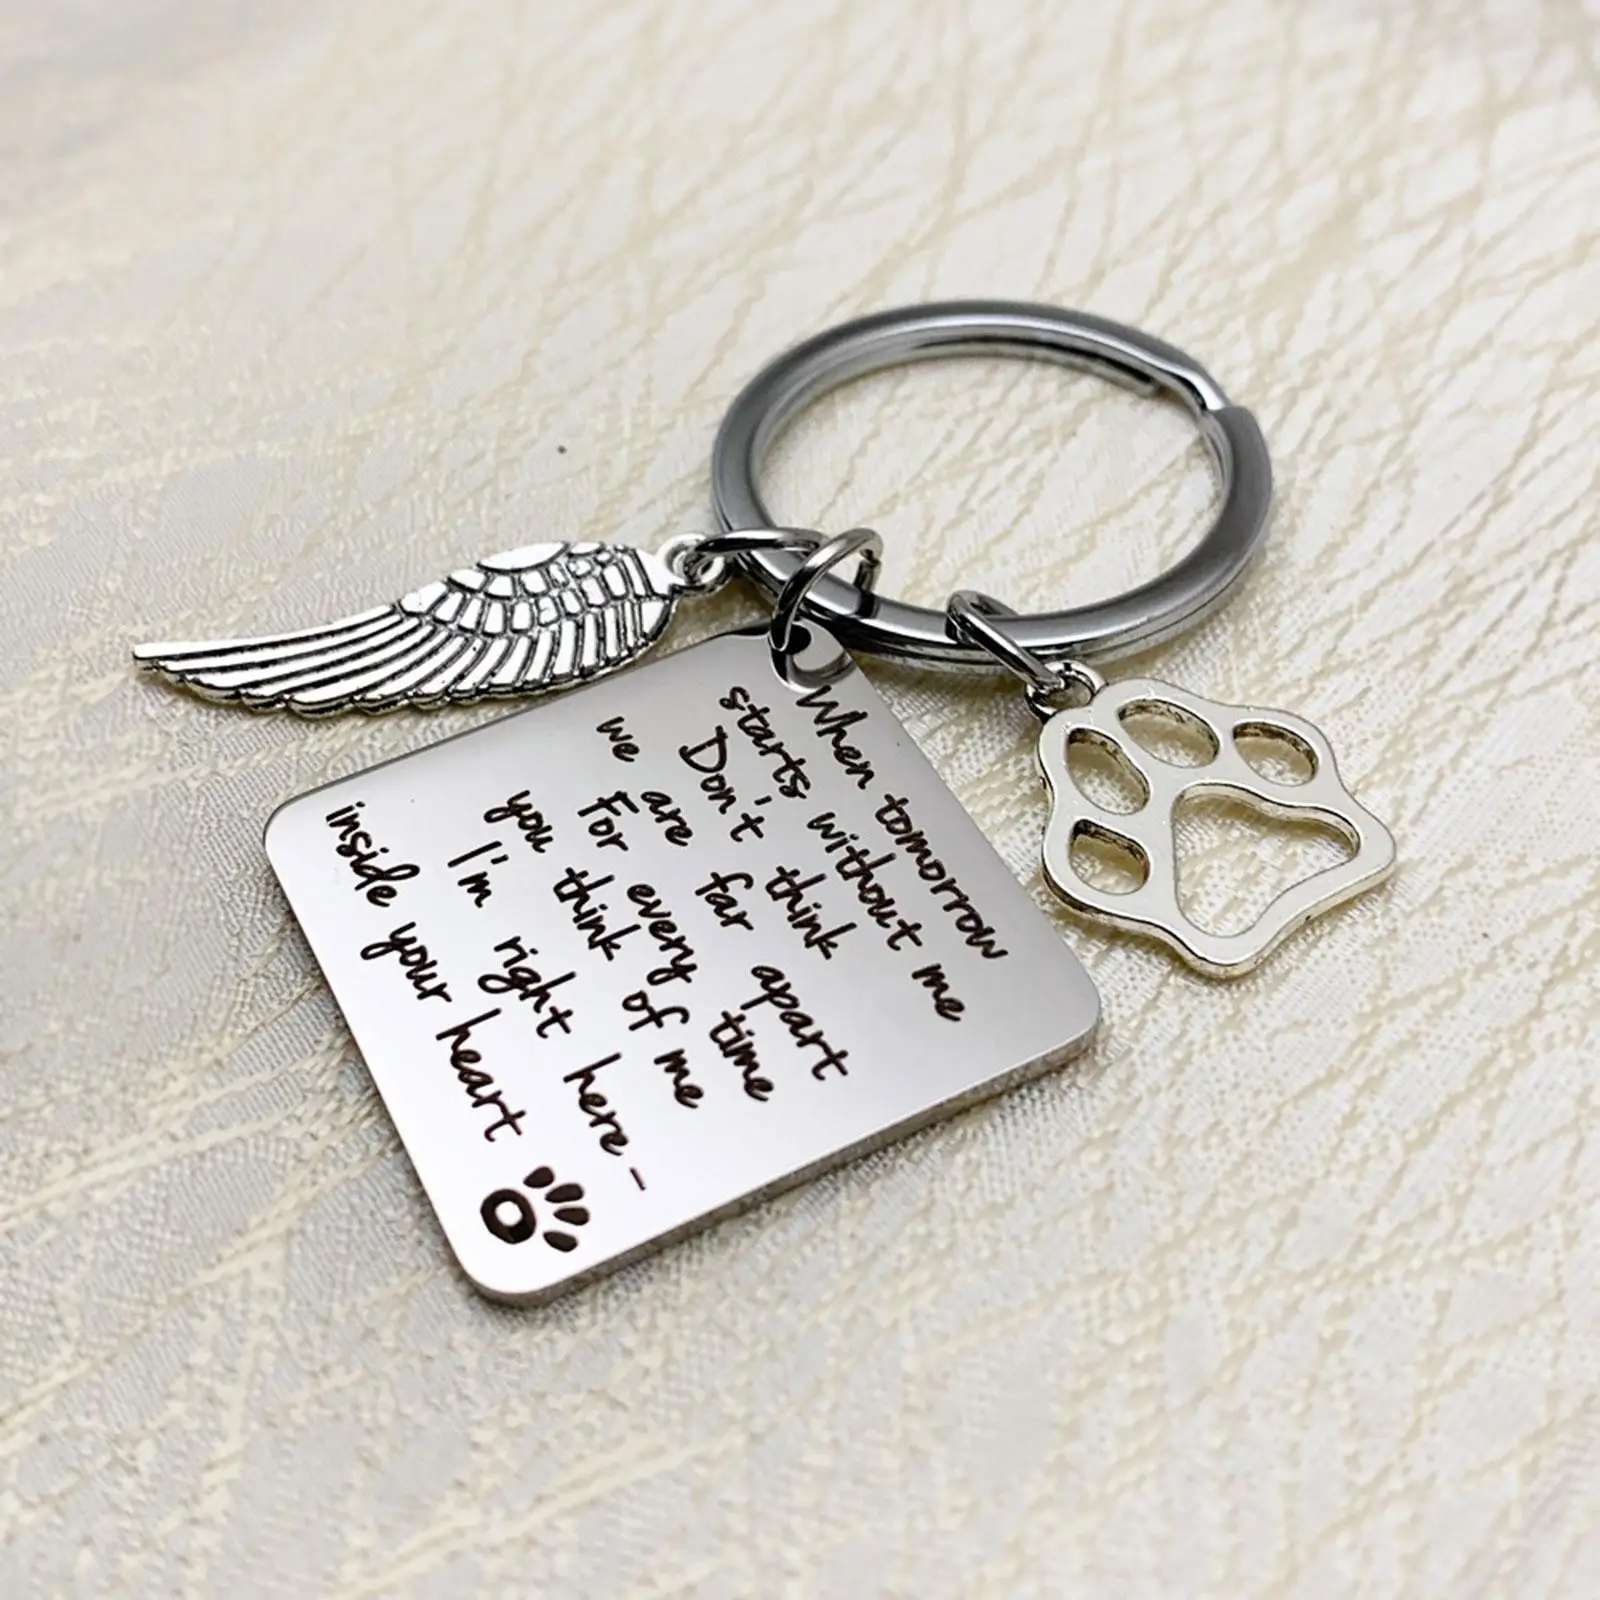 Dog Cat Pet Memorial Gifts Keychain Pet Loss Gifts Bereavement Gifts Keepsake Gift Memorial Key Ring Dogs Died Sympathy Gift